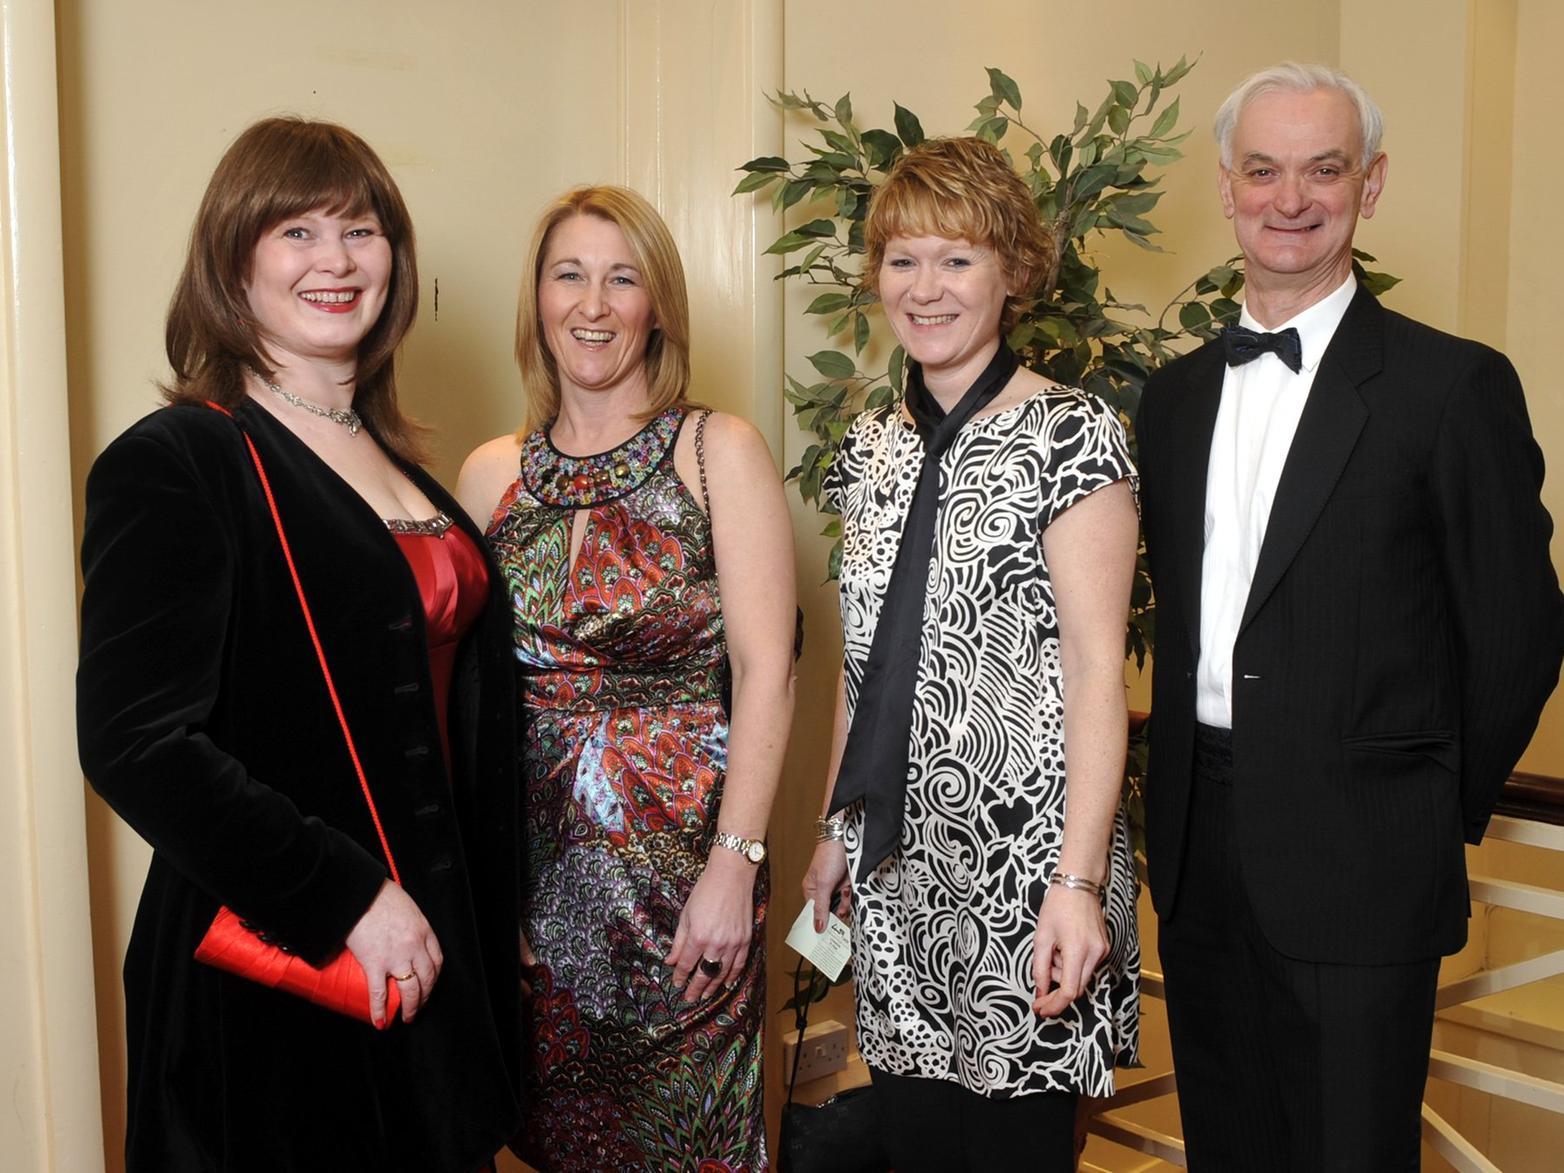 Julie Graves, Elizabeth McPherson, Emma Teasdale, and Michael Graves, from Scarborough Carers Resource.